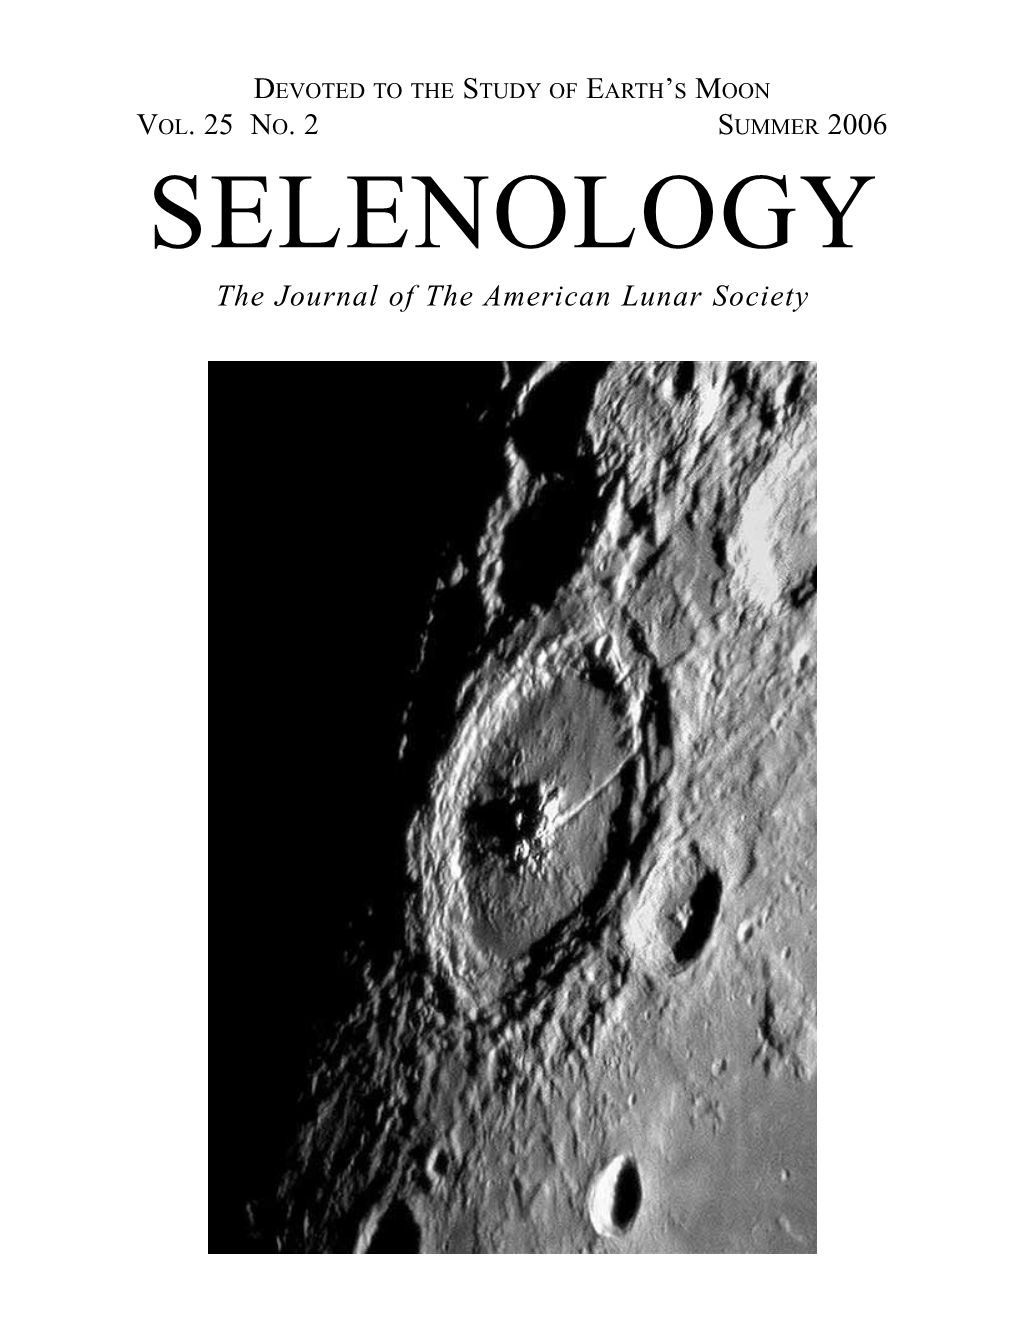 SELENOLOGY the Journal of the American Lunar Society